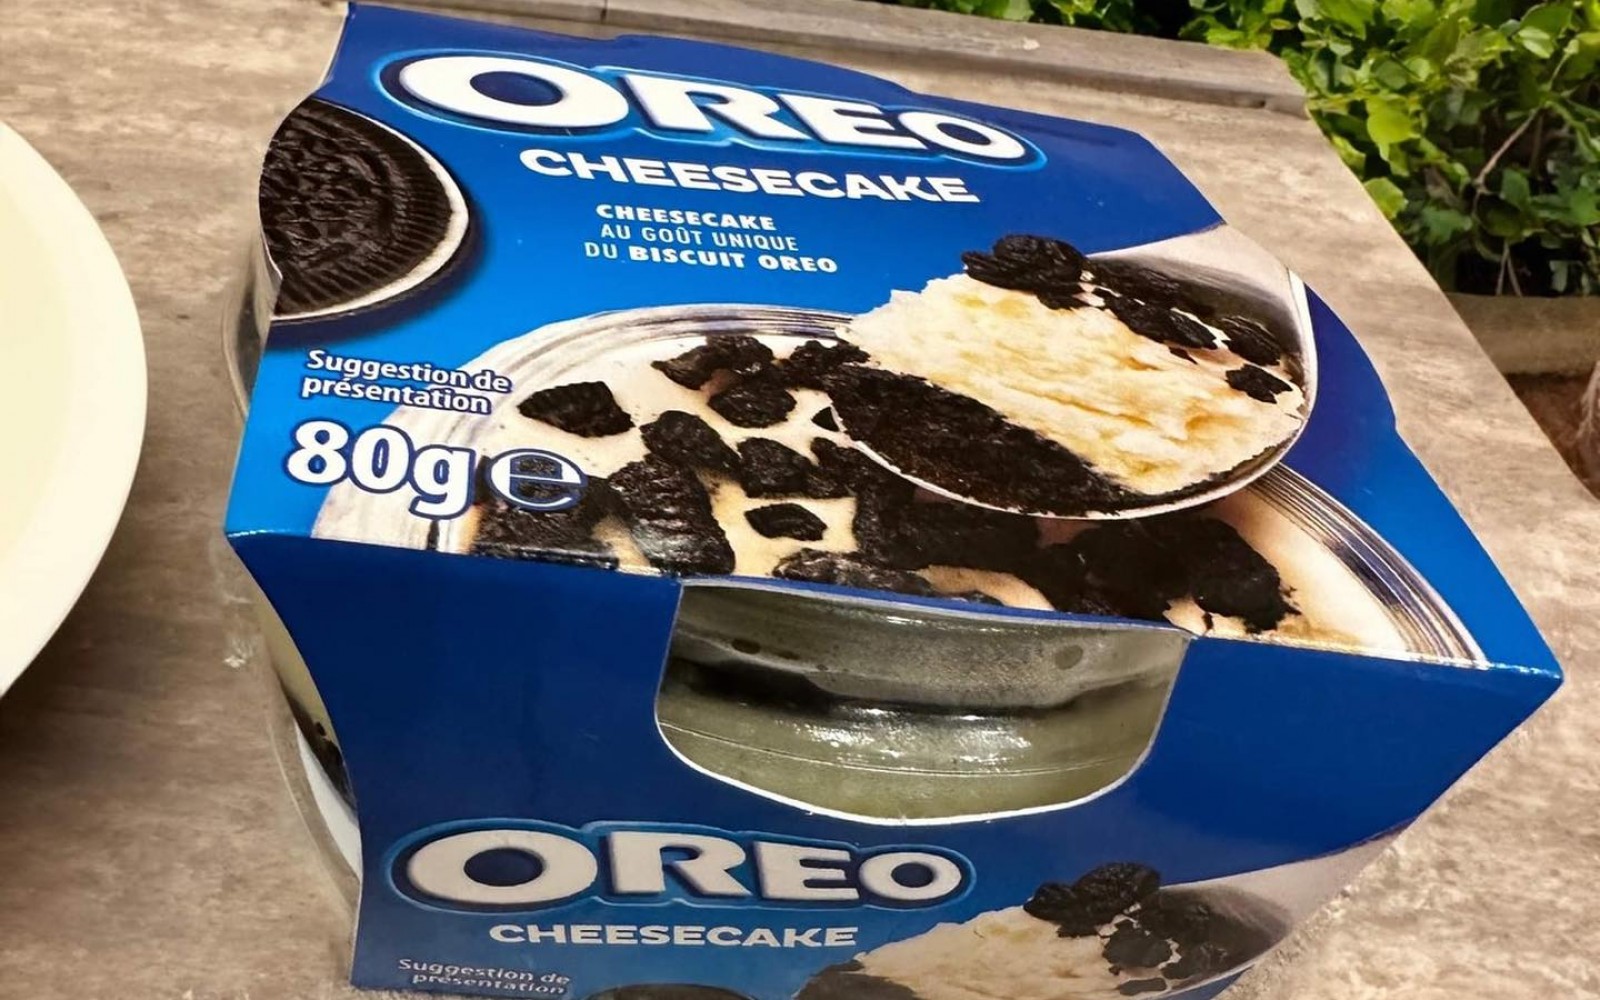 Who doesn't love Oreos, especially when it comes to a cheesecake sundae?!